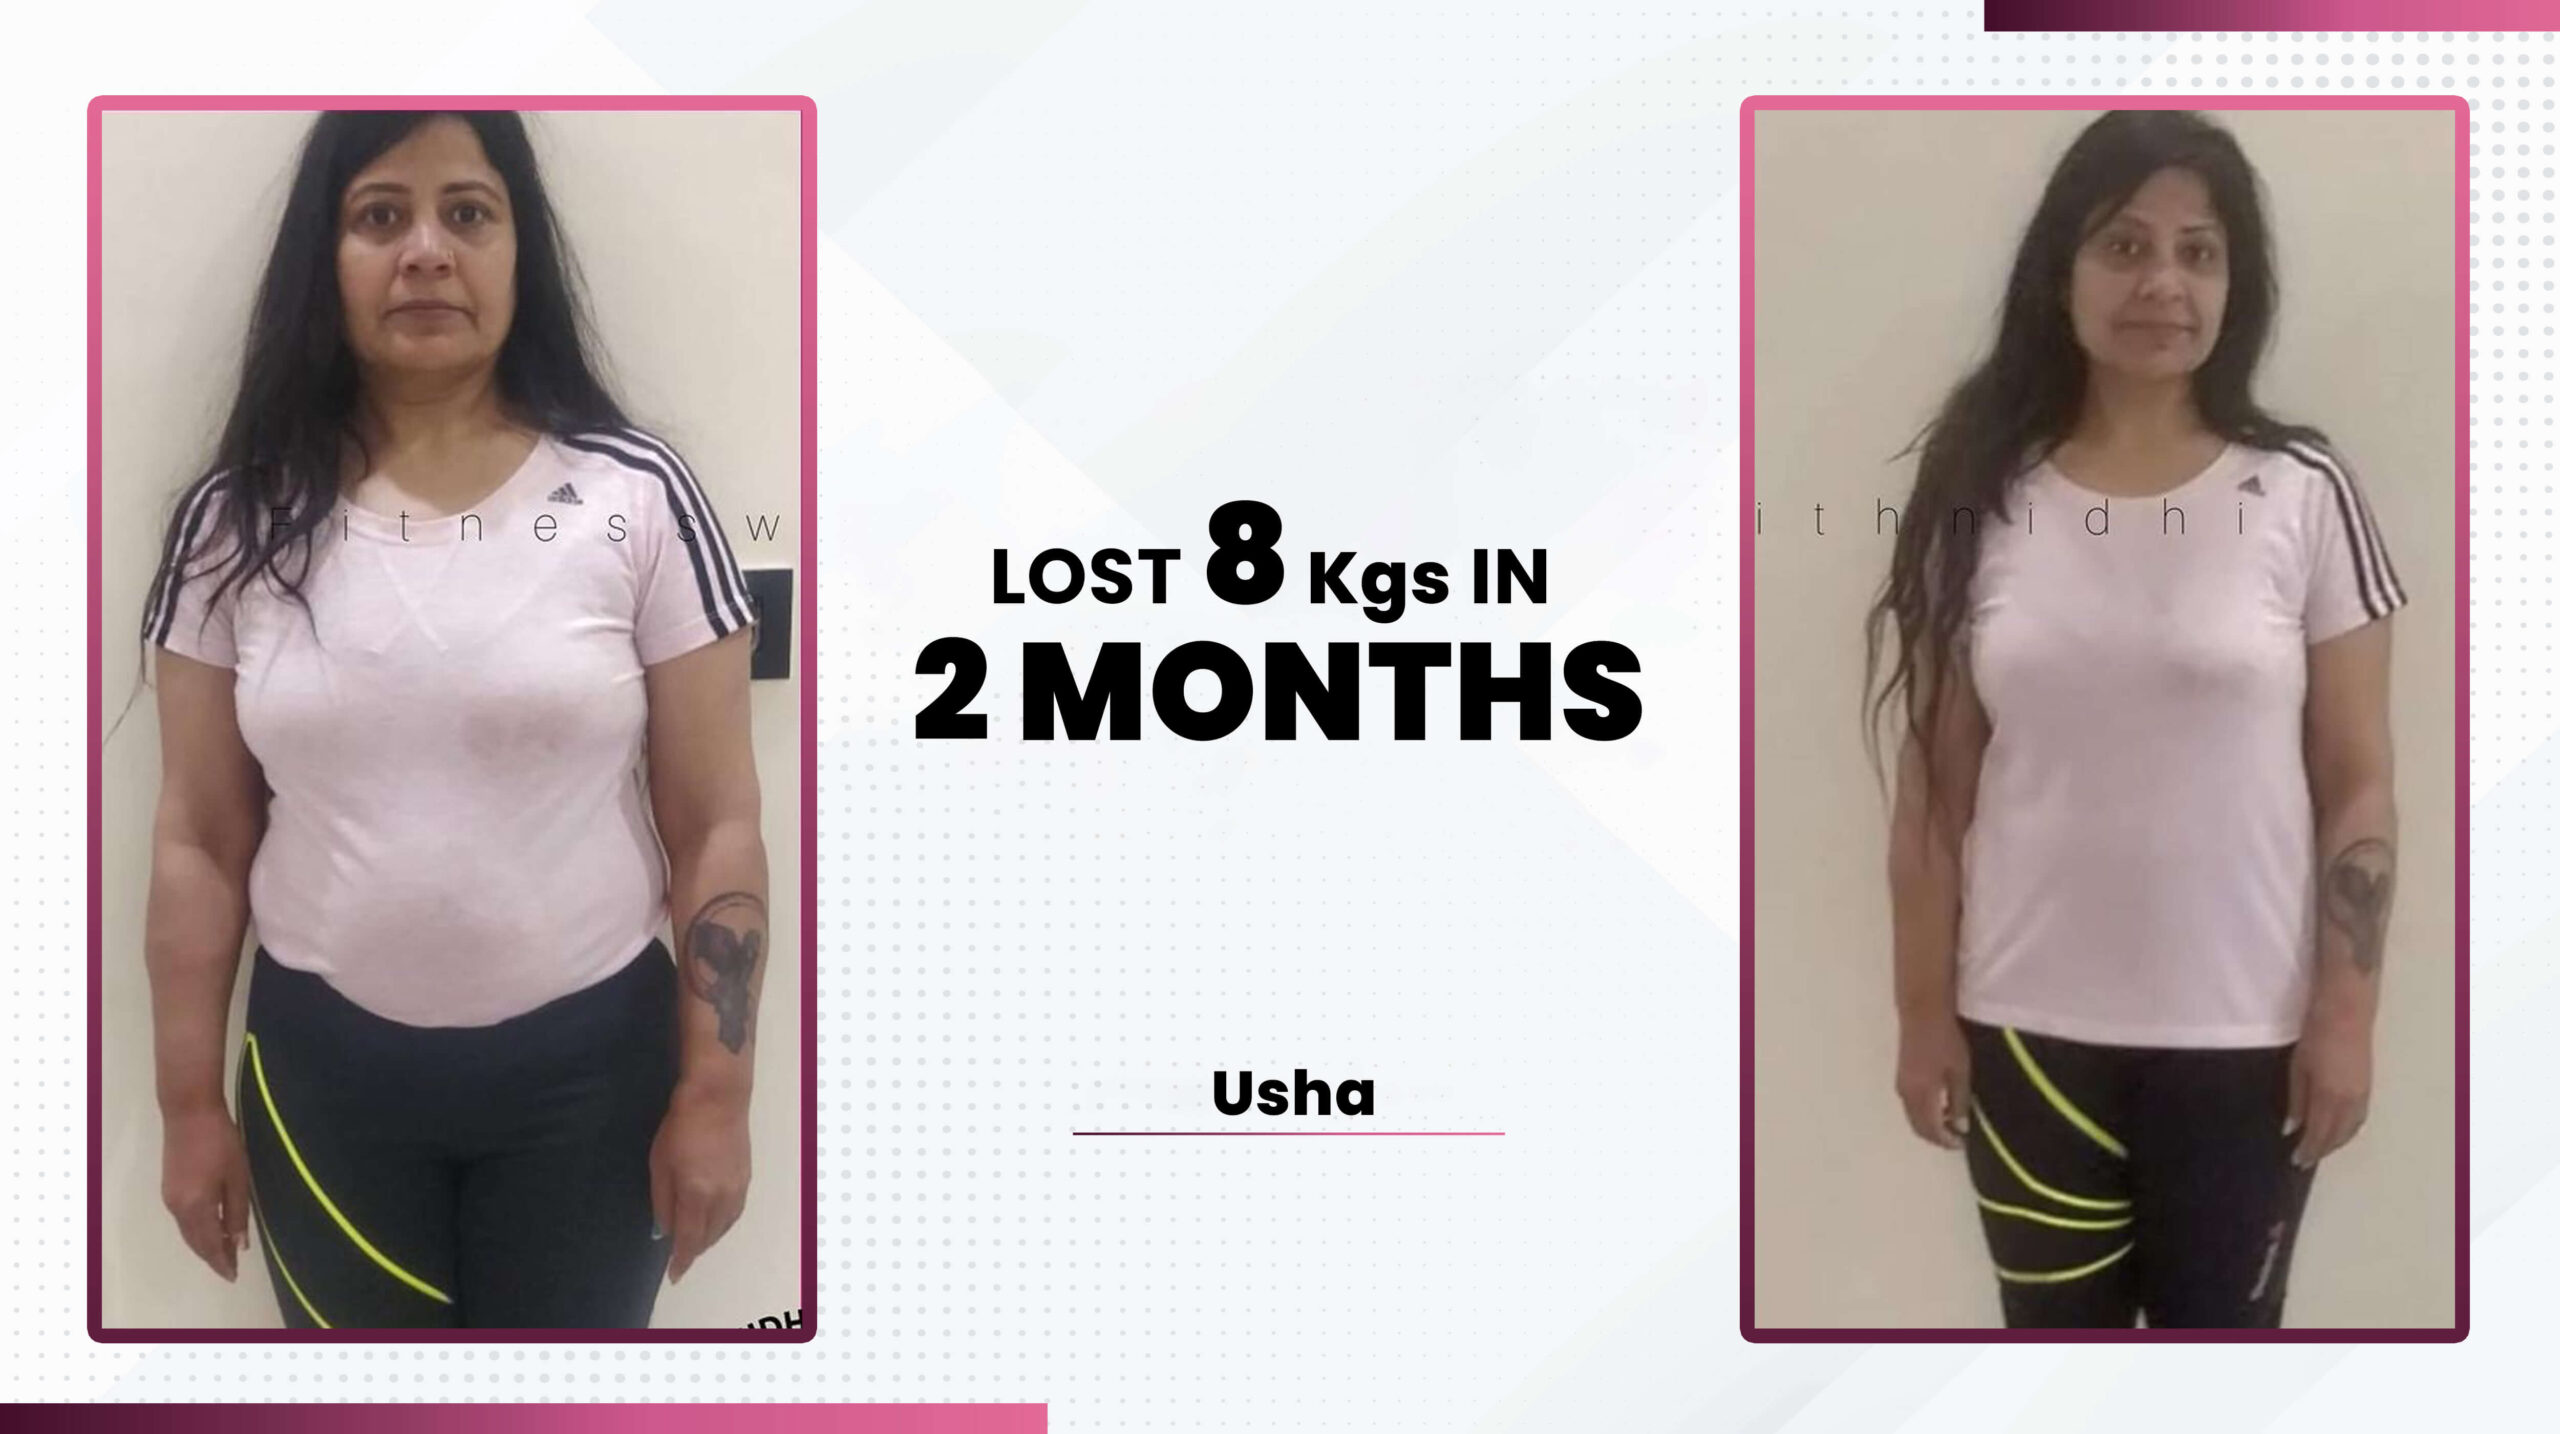 11usha weight loss transformation lost 8 kgs in 2 month